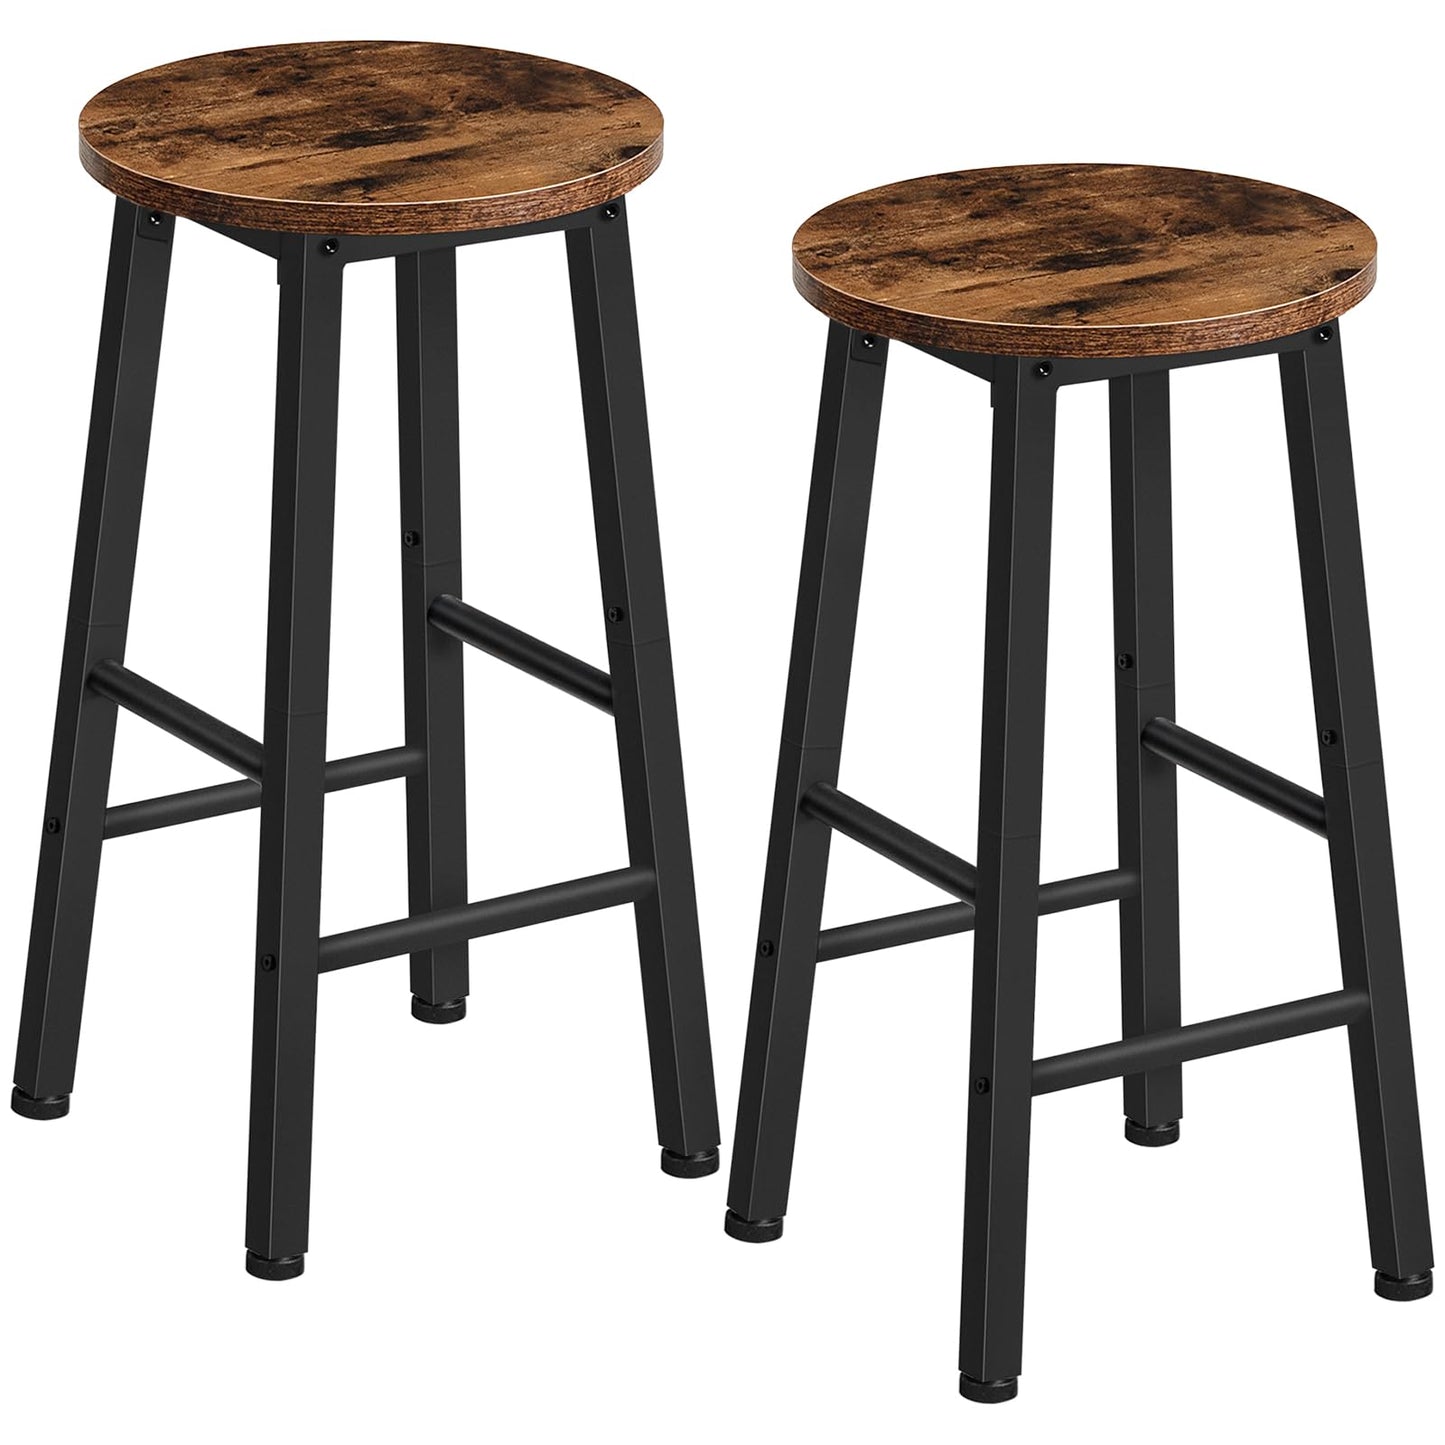 HOOBRO Bar Stools Set of 2, Counter Height Bar Stools, 24.8" Bar Stools for Kitchen Island, Industrial Kitchen Bar Chairs, for Dining Room, Kitchen,